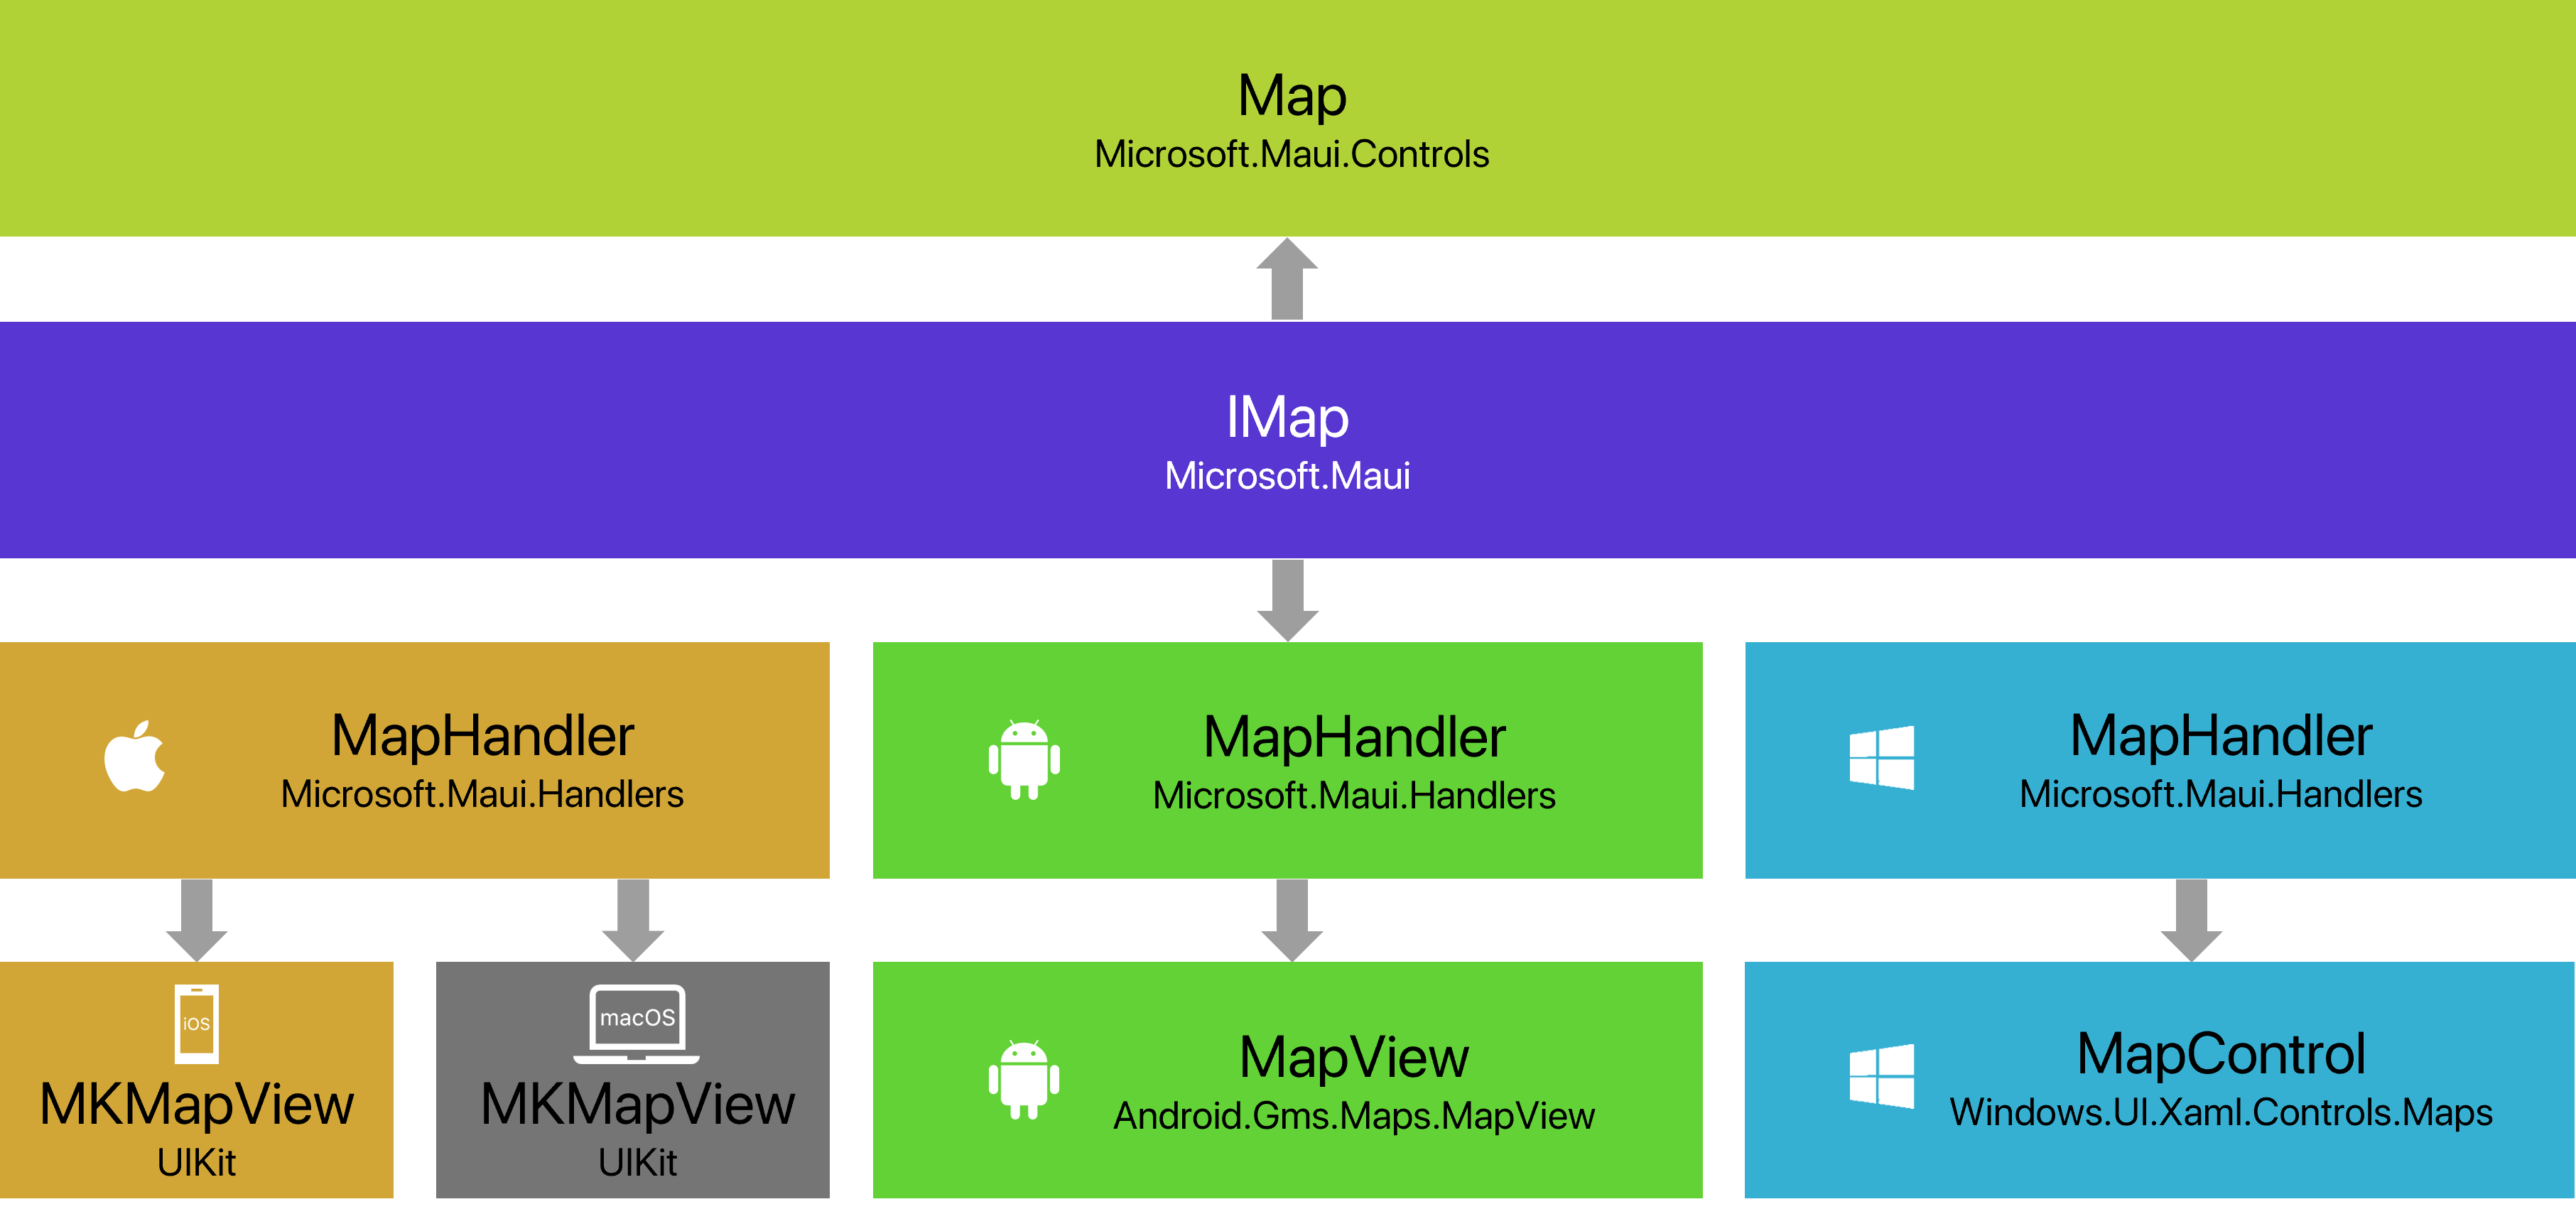 DOTNET MAUI handler architecture showing how our maps control will use a handler do use native Android and iOS view controls